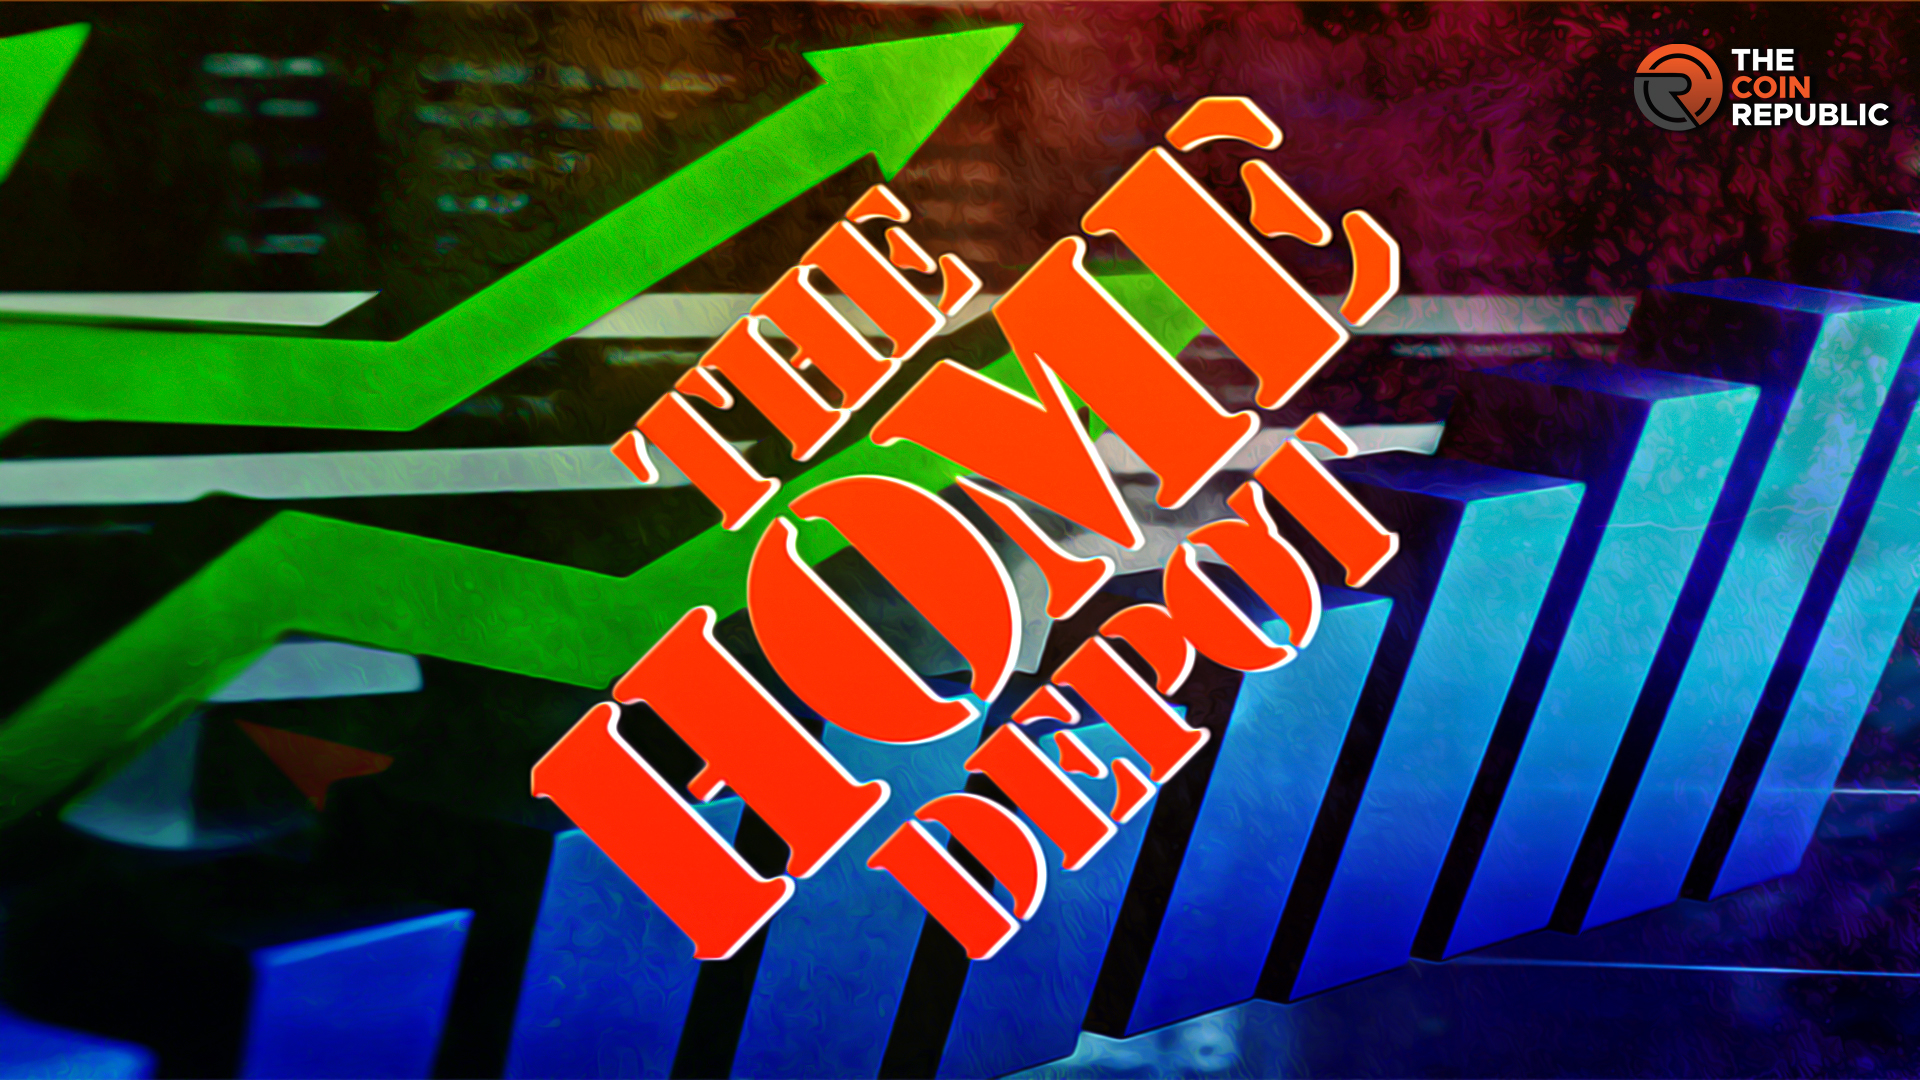 Home Depot Stock (NYSE: HD) Crumbles Under Mortgage Pressure